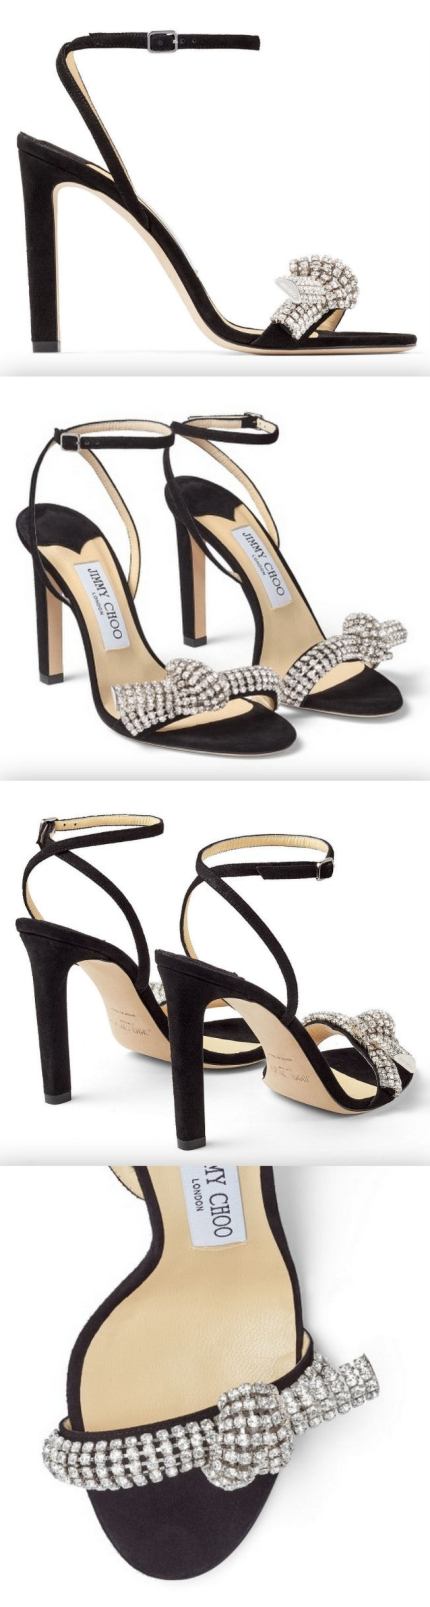 Black Suede Sandals with Pavé Crystal Cord Detail